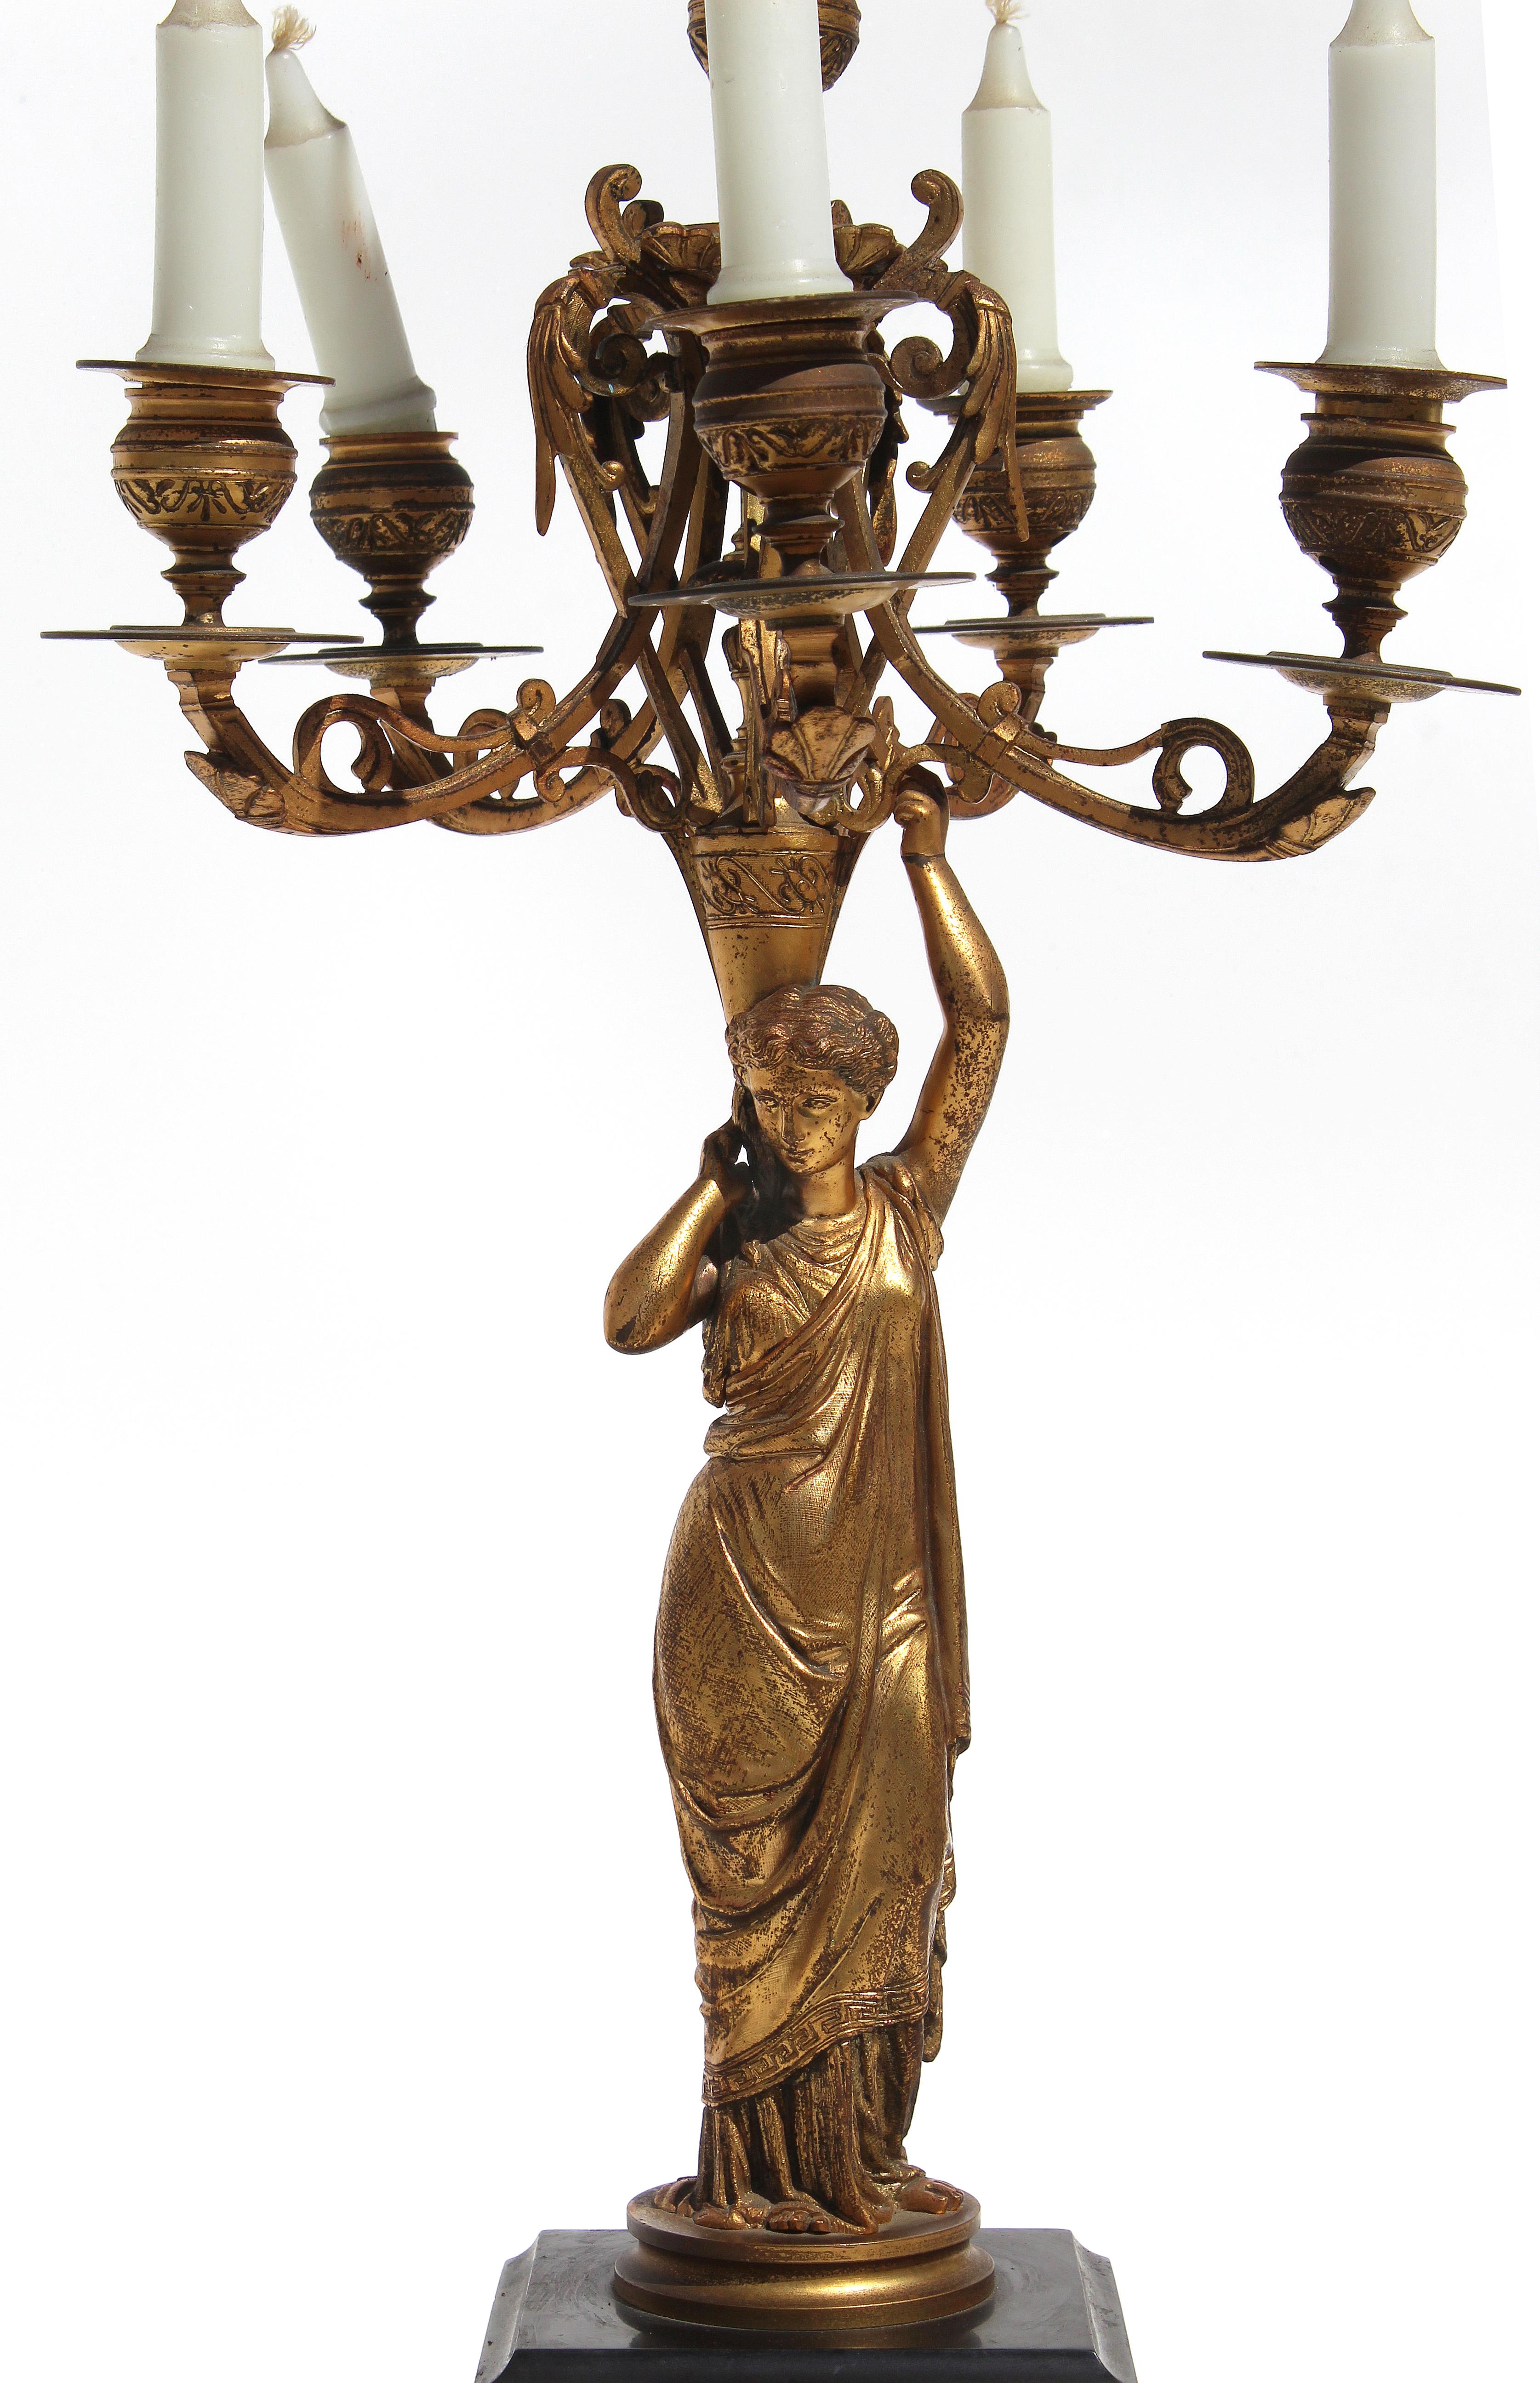 Gilt French 19th Century Bronze Doré and Marble Figural Candelabra, Mounted as a Lamp